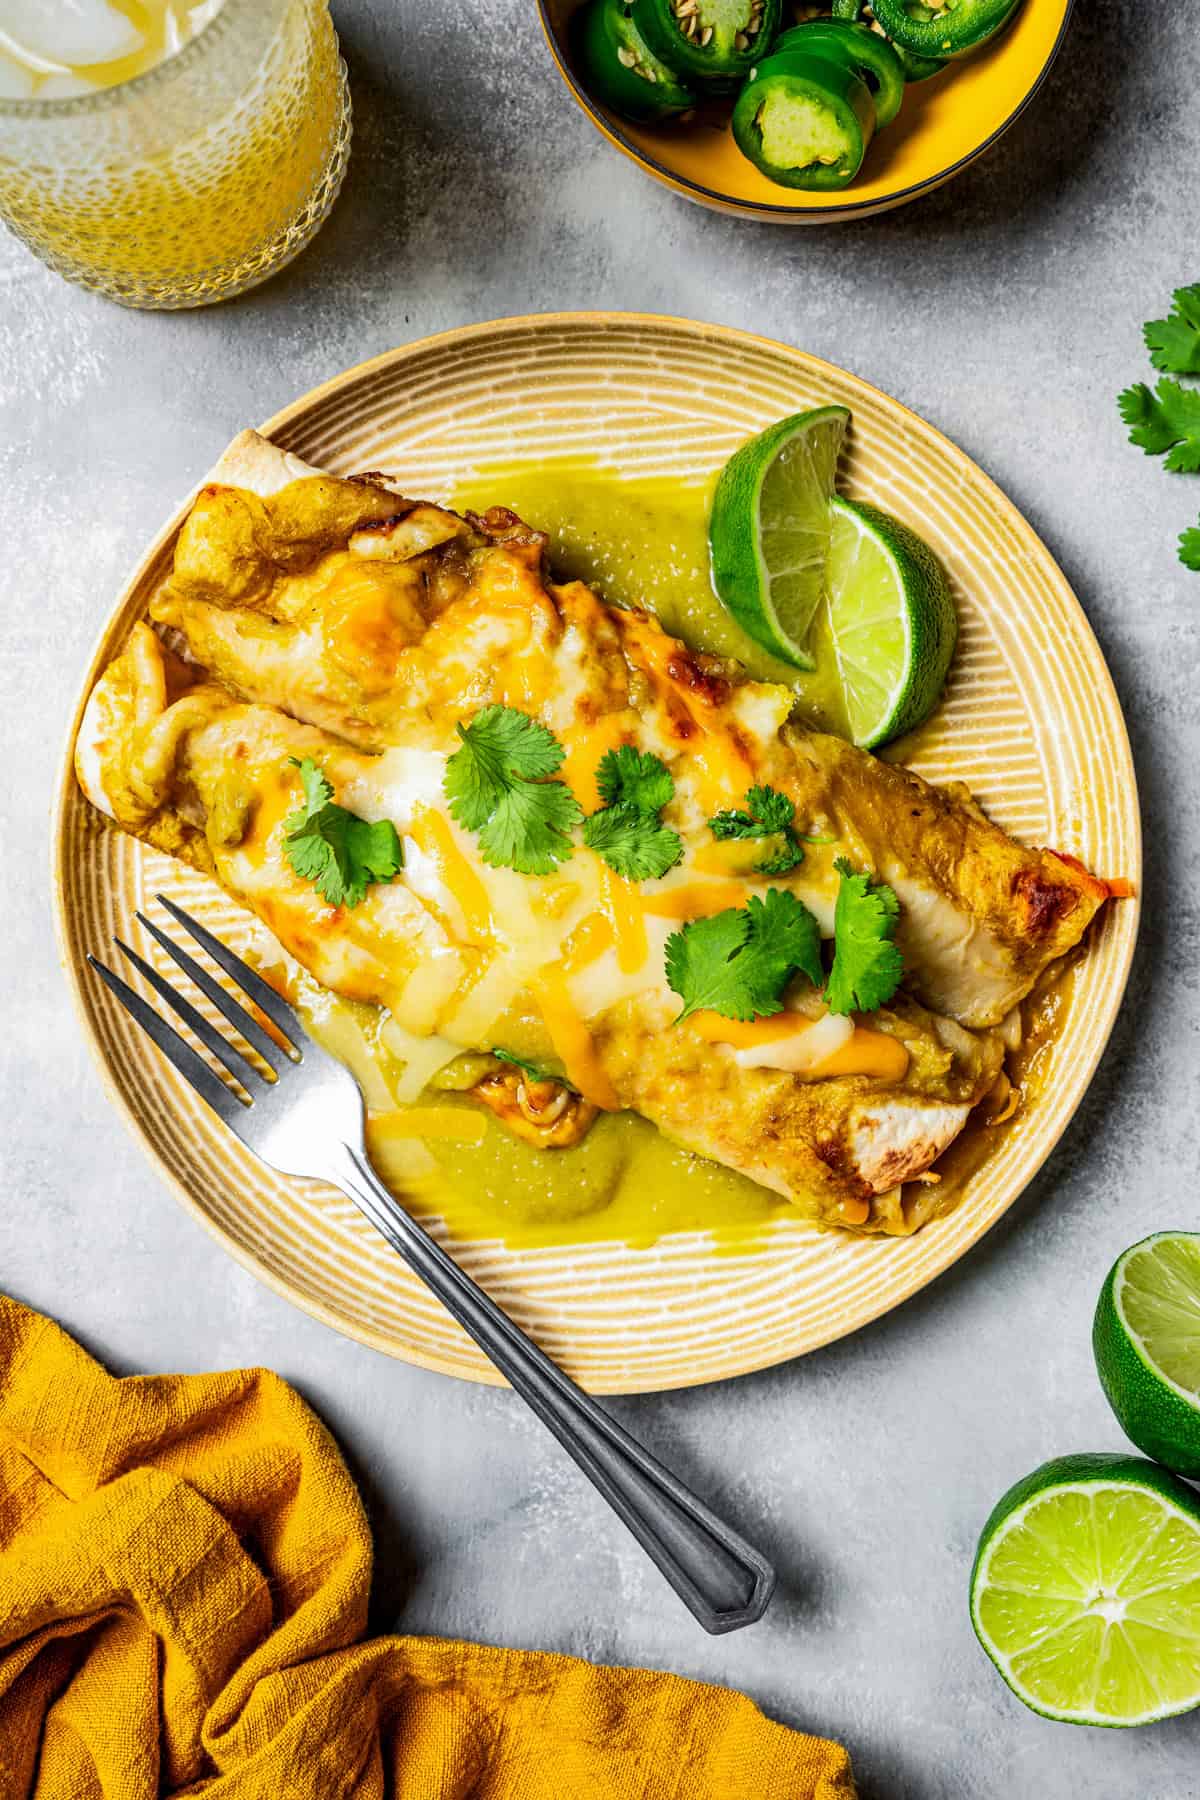 Two enchiladas are served on a dinner plate and garnished with cilantro. Next to the plate is a bowl of sliced jalapenos and a tall drinking glass.